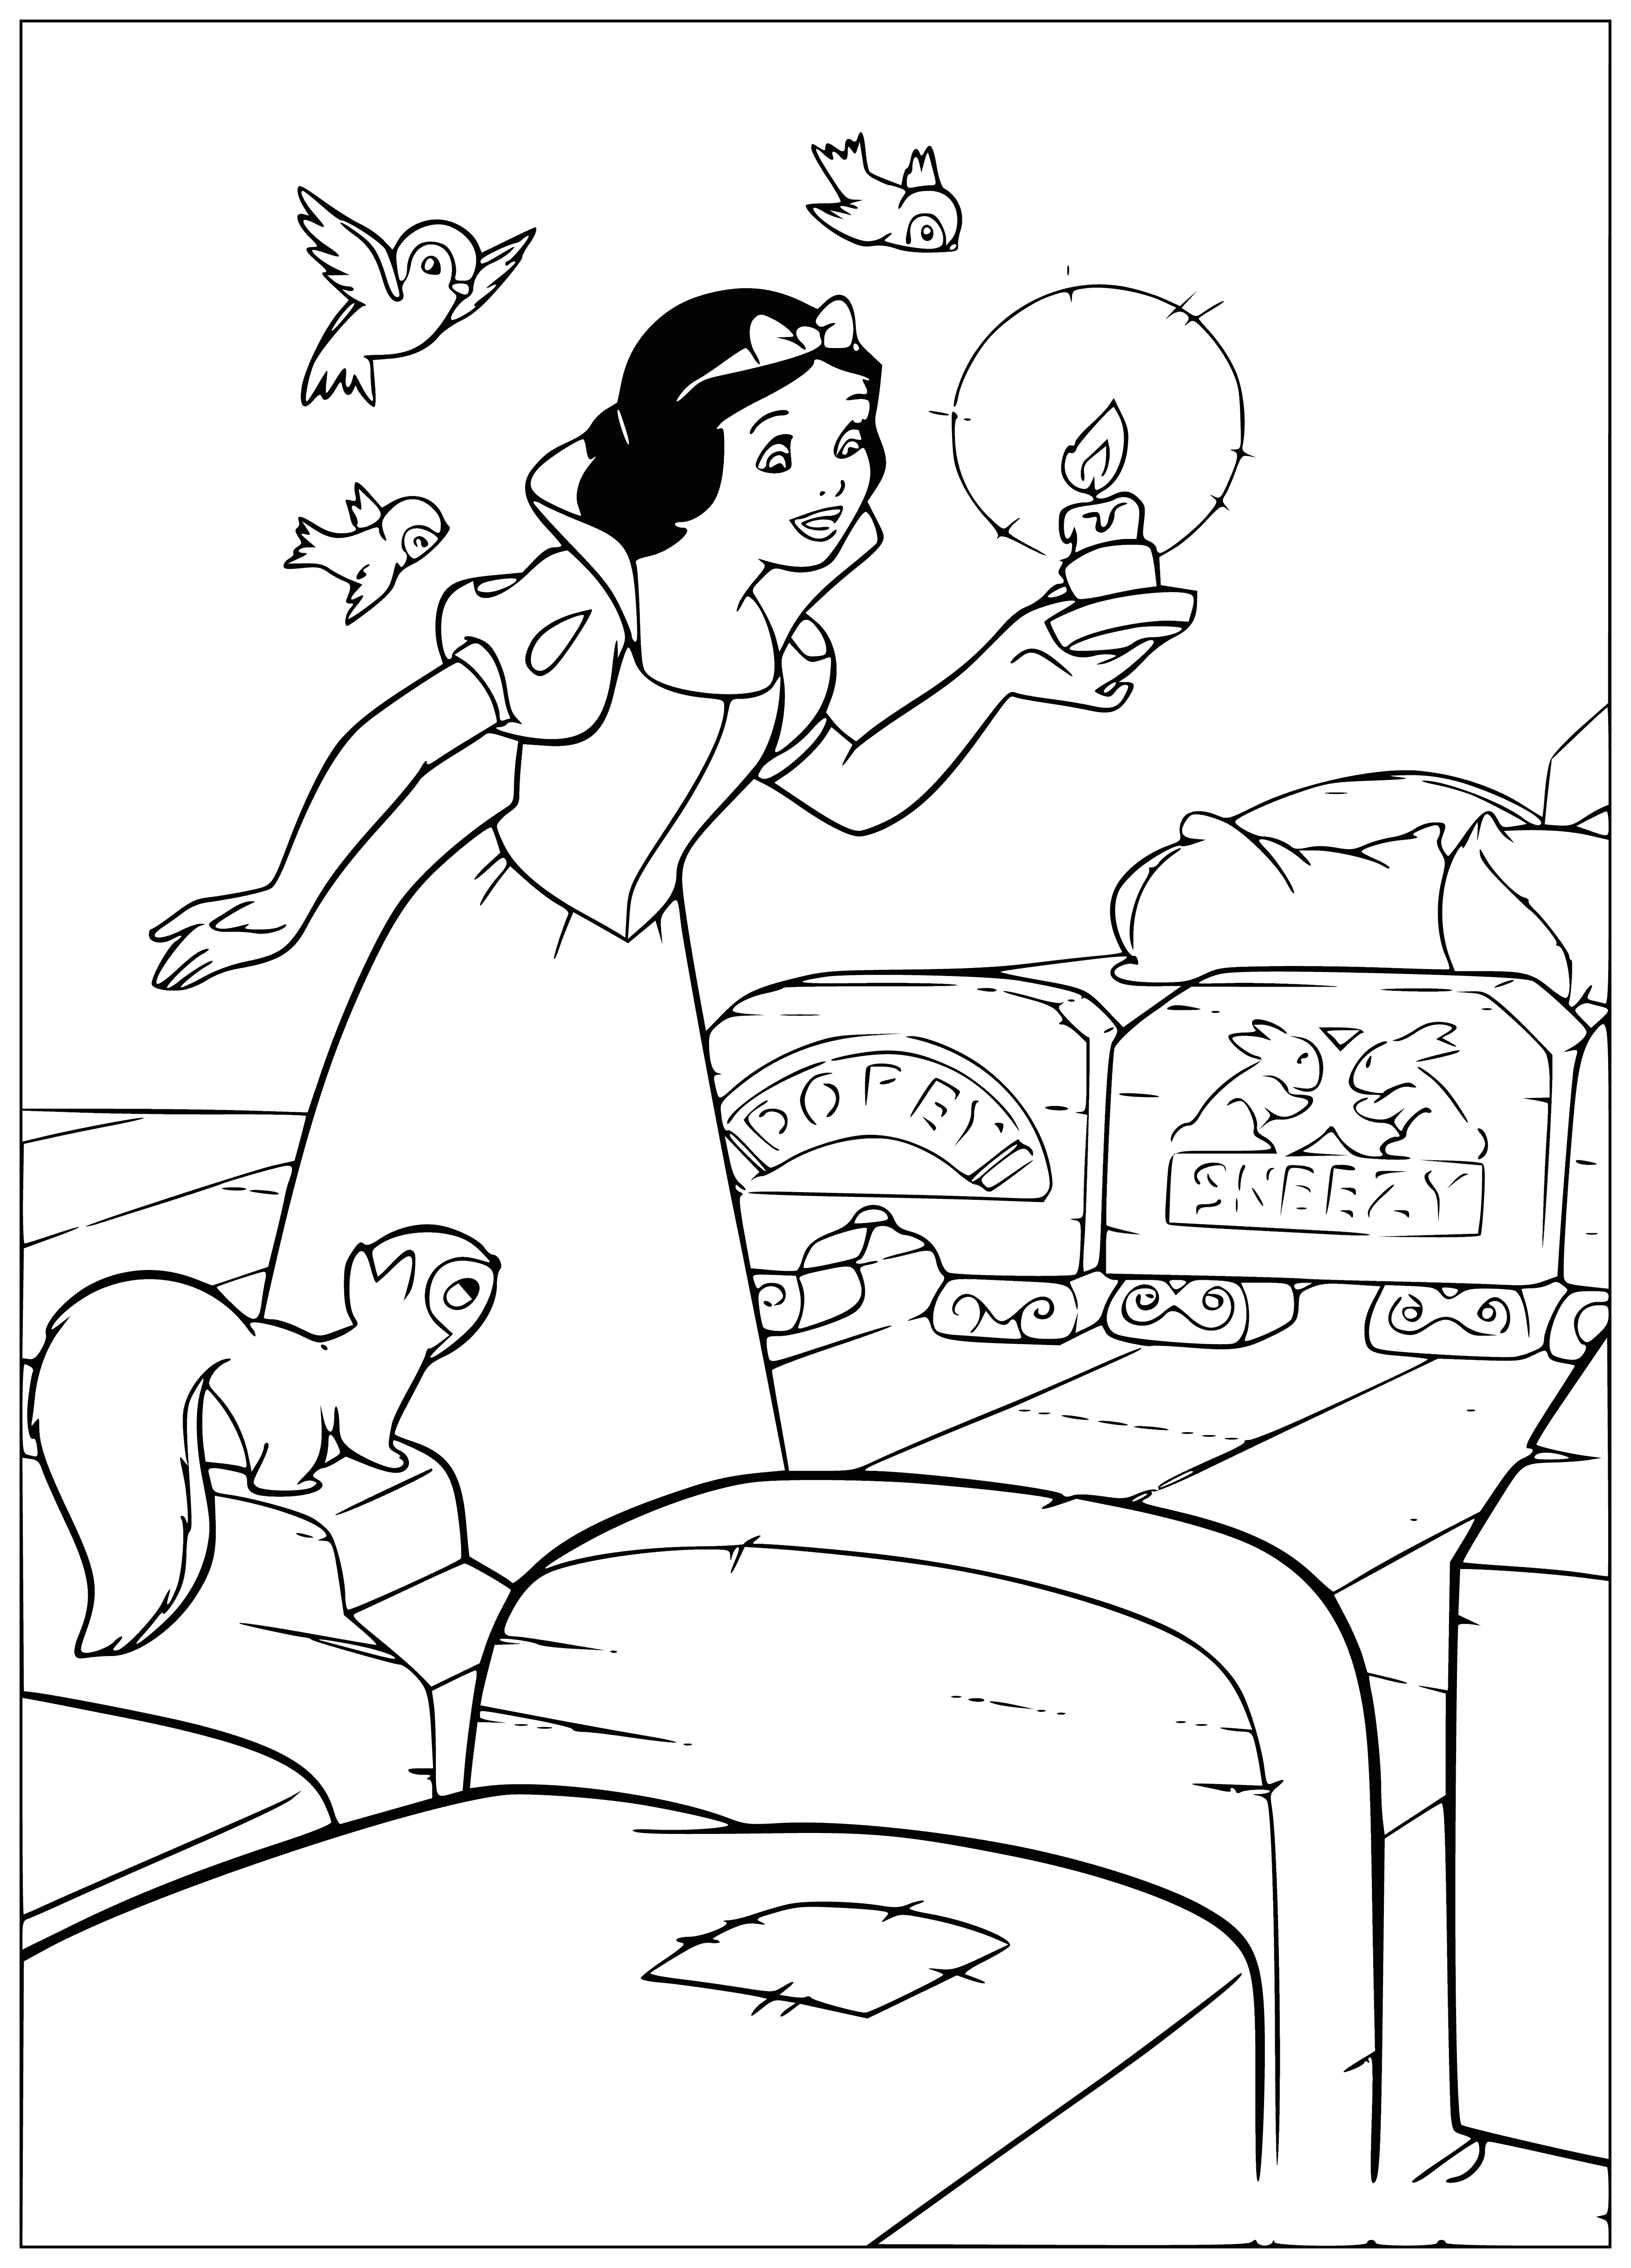 coloring page: Snow White kneels in a bedroom with seven small beds, looking out a window at a forest. She is expressionless.